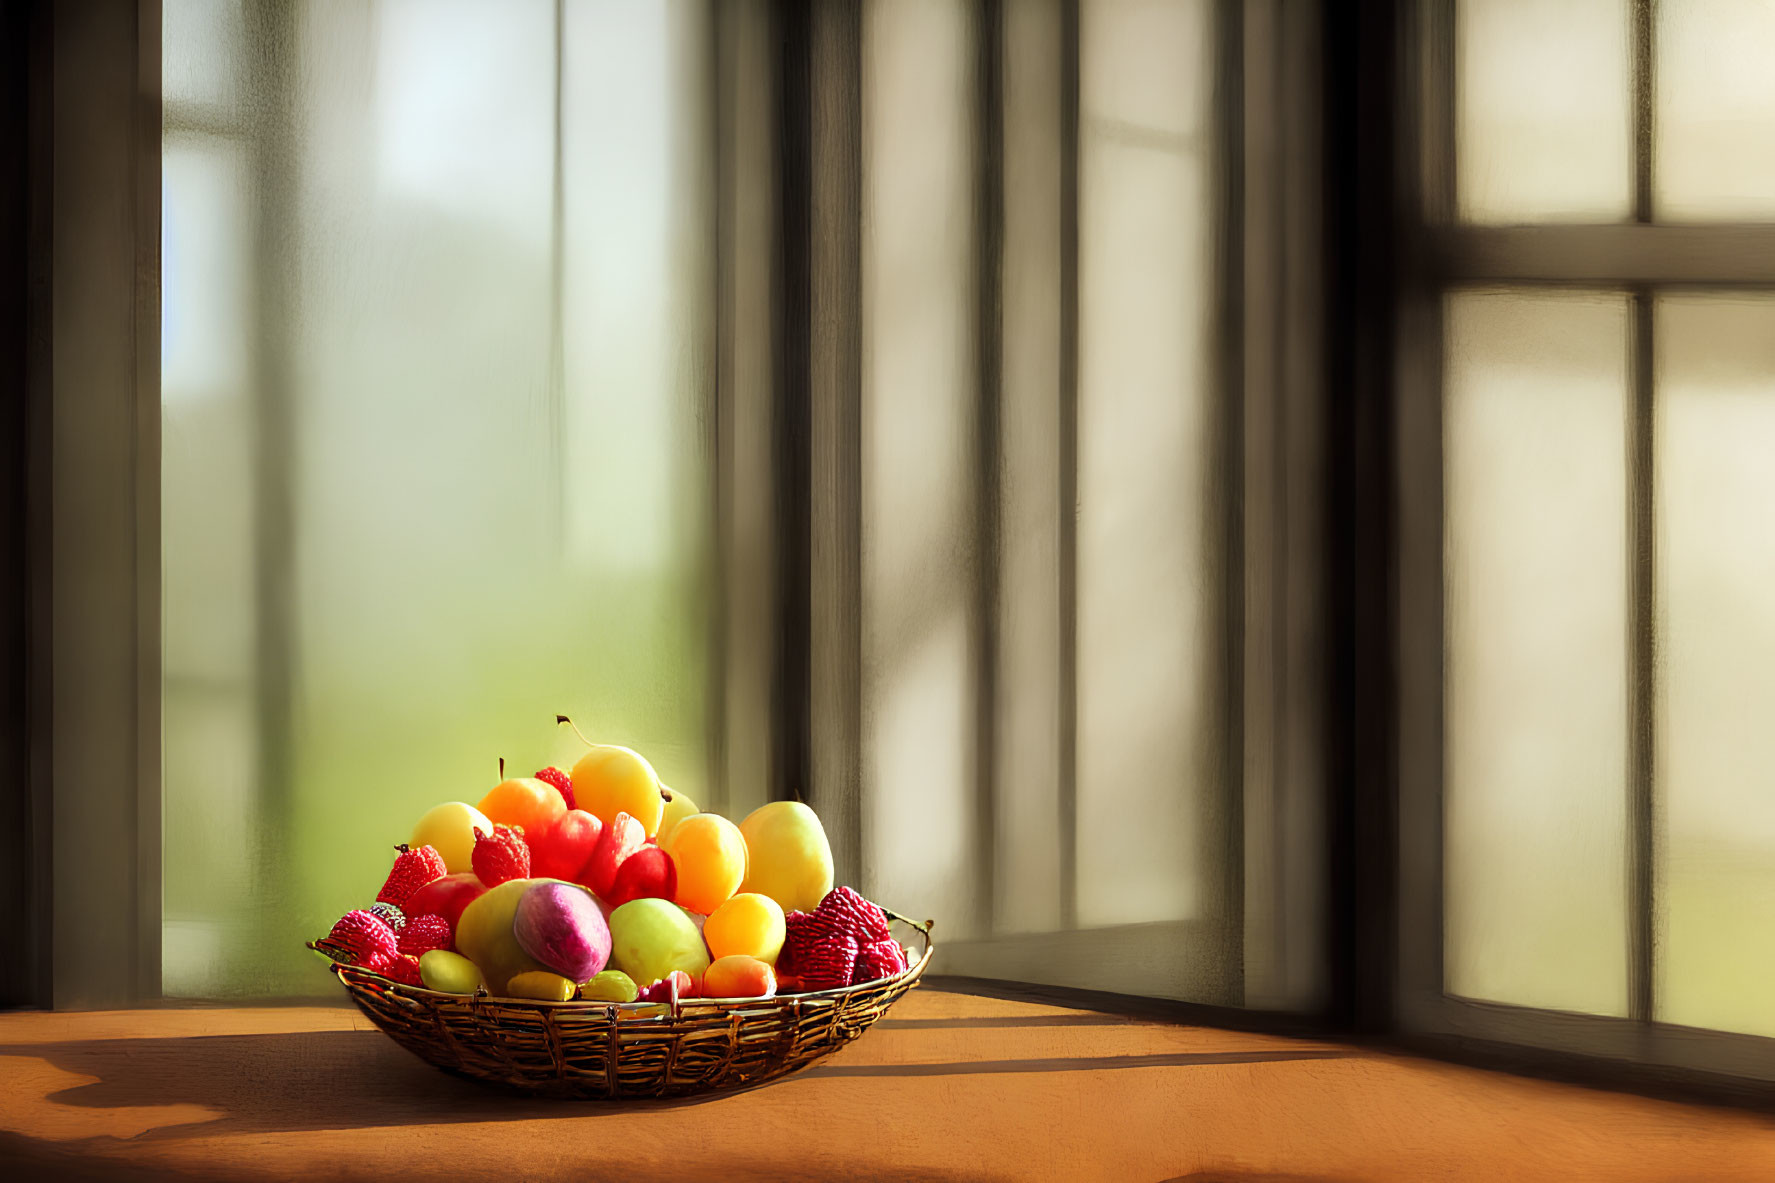 Sunlit Room with Colorful Fruits in Wicker Basket